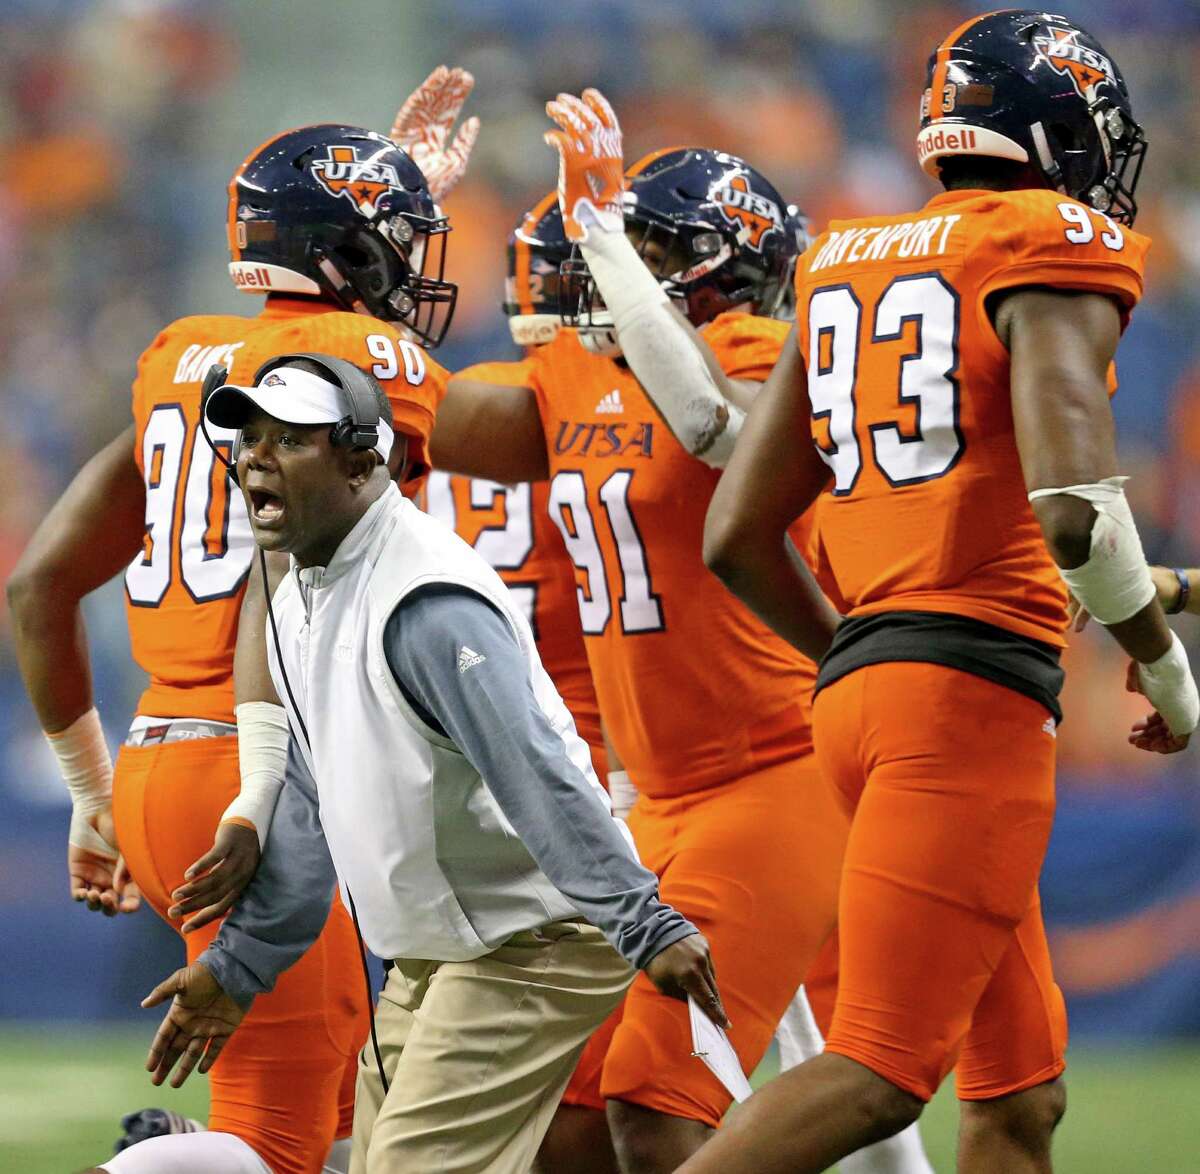 UTSA Roadrunners coach Frank Wilson greets players as they copme off the field after a play against the UTEP Miners on Oct. 22, 2016 at the Alamodome.